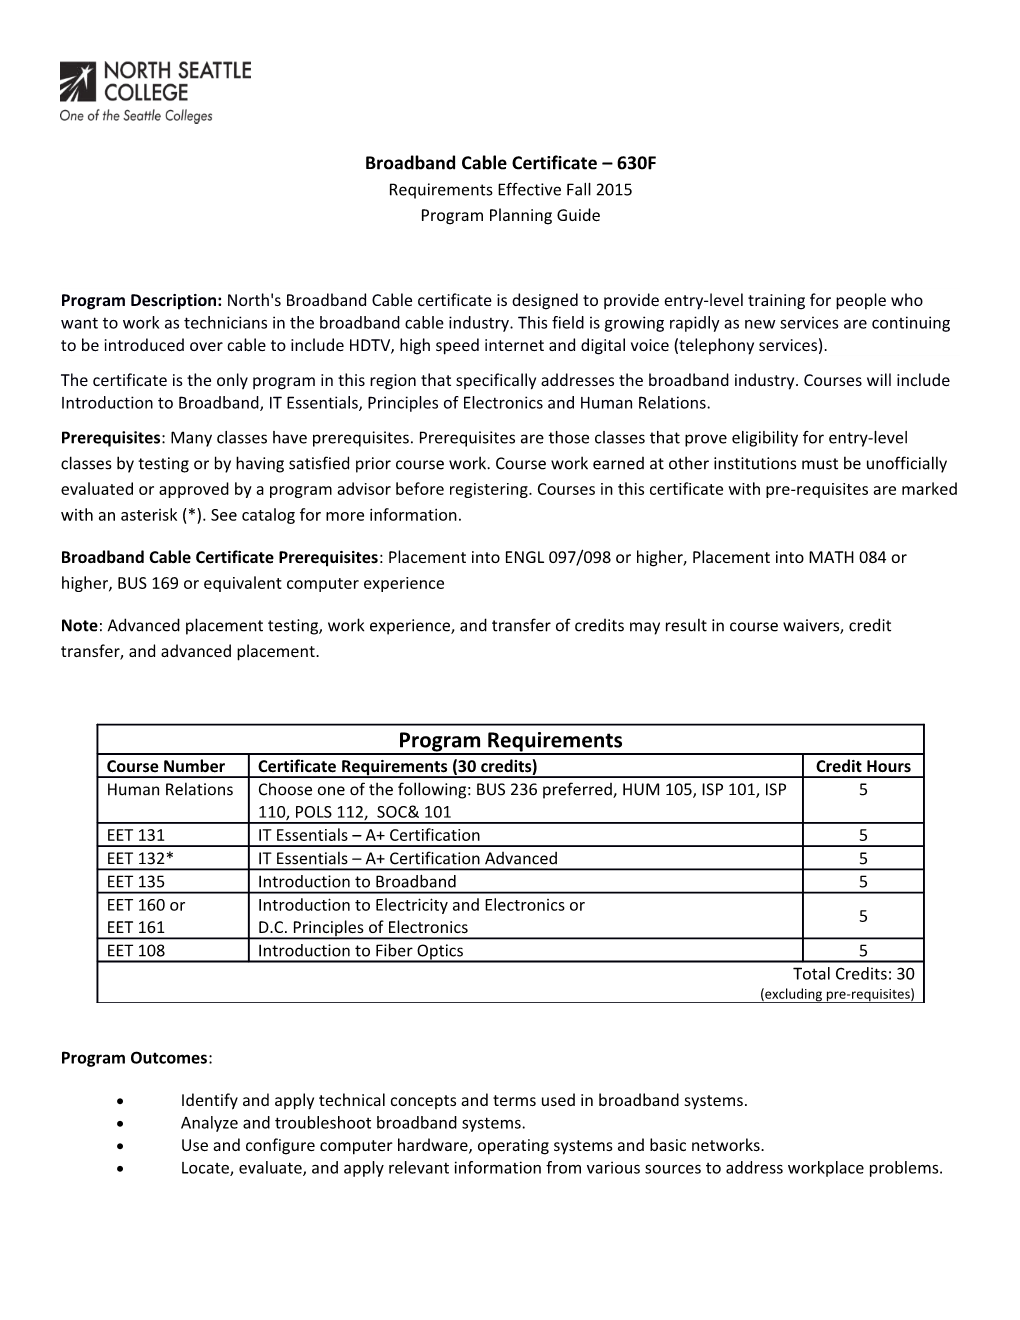 Broadband Cable Certificate 630F Requirements Effective Fall 2015 Program Planning Guide